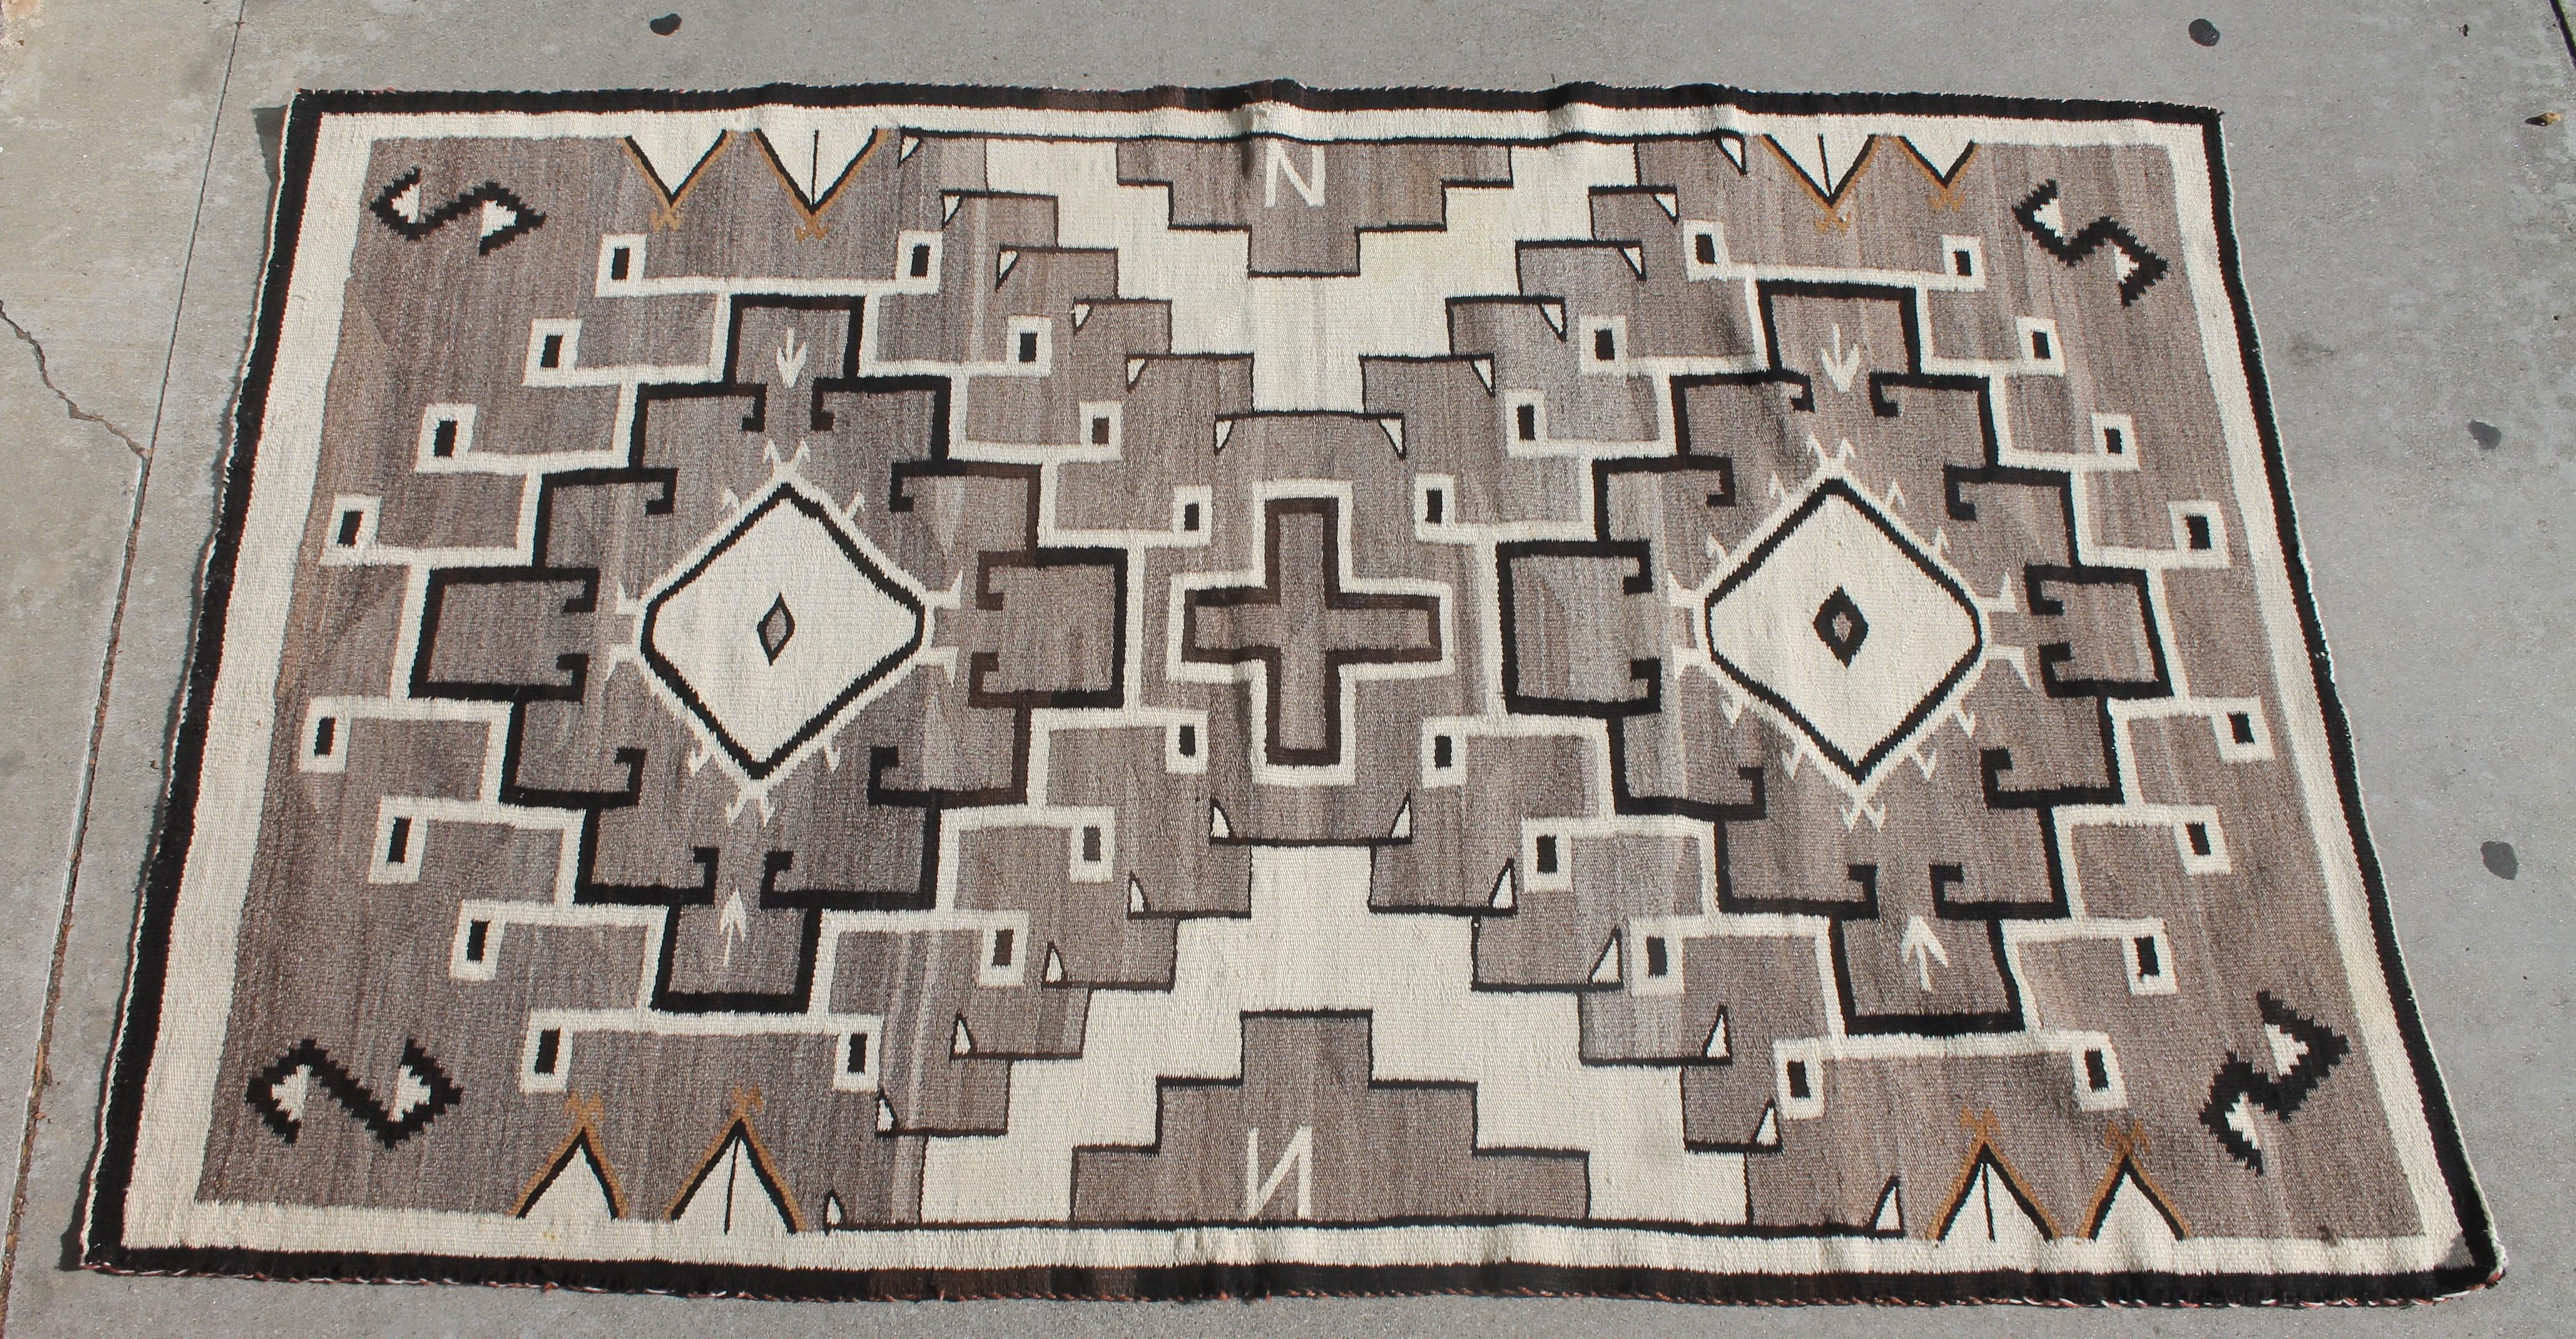 This fine American Indian weaving is a great example of a great geometric Navajo rug. The condition is very good.